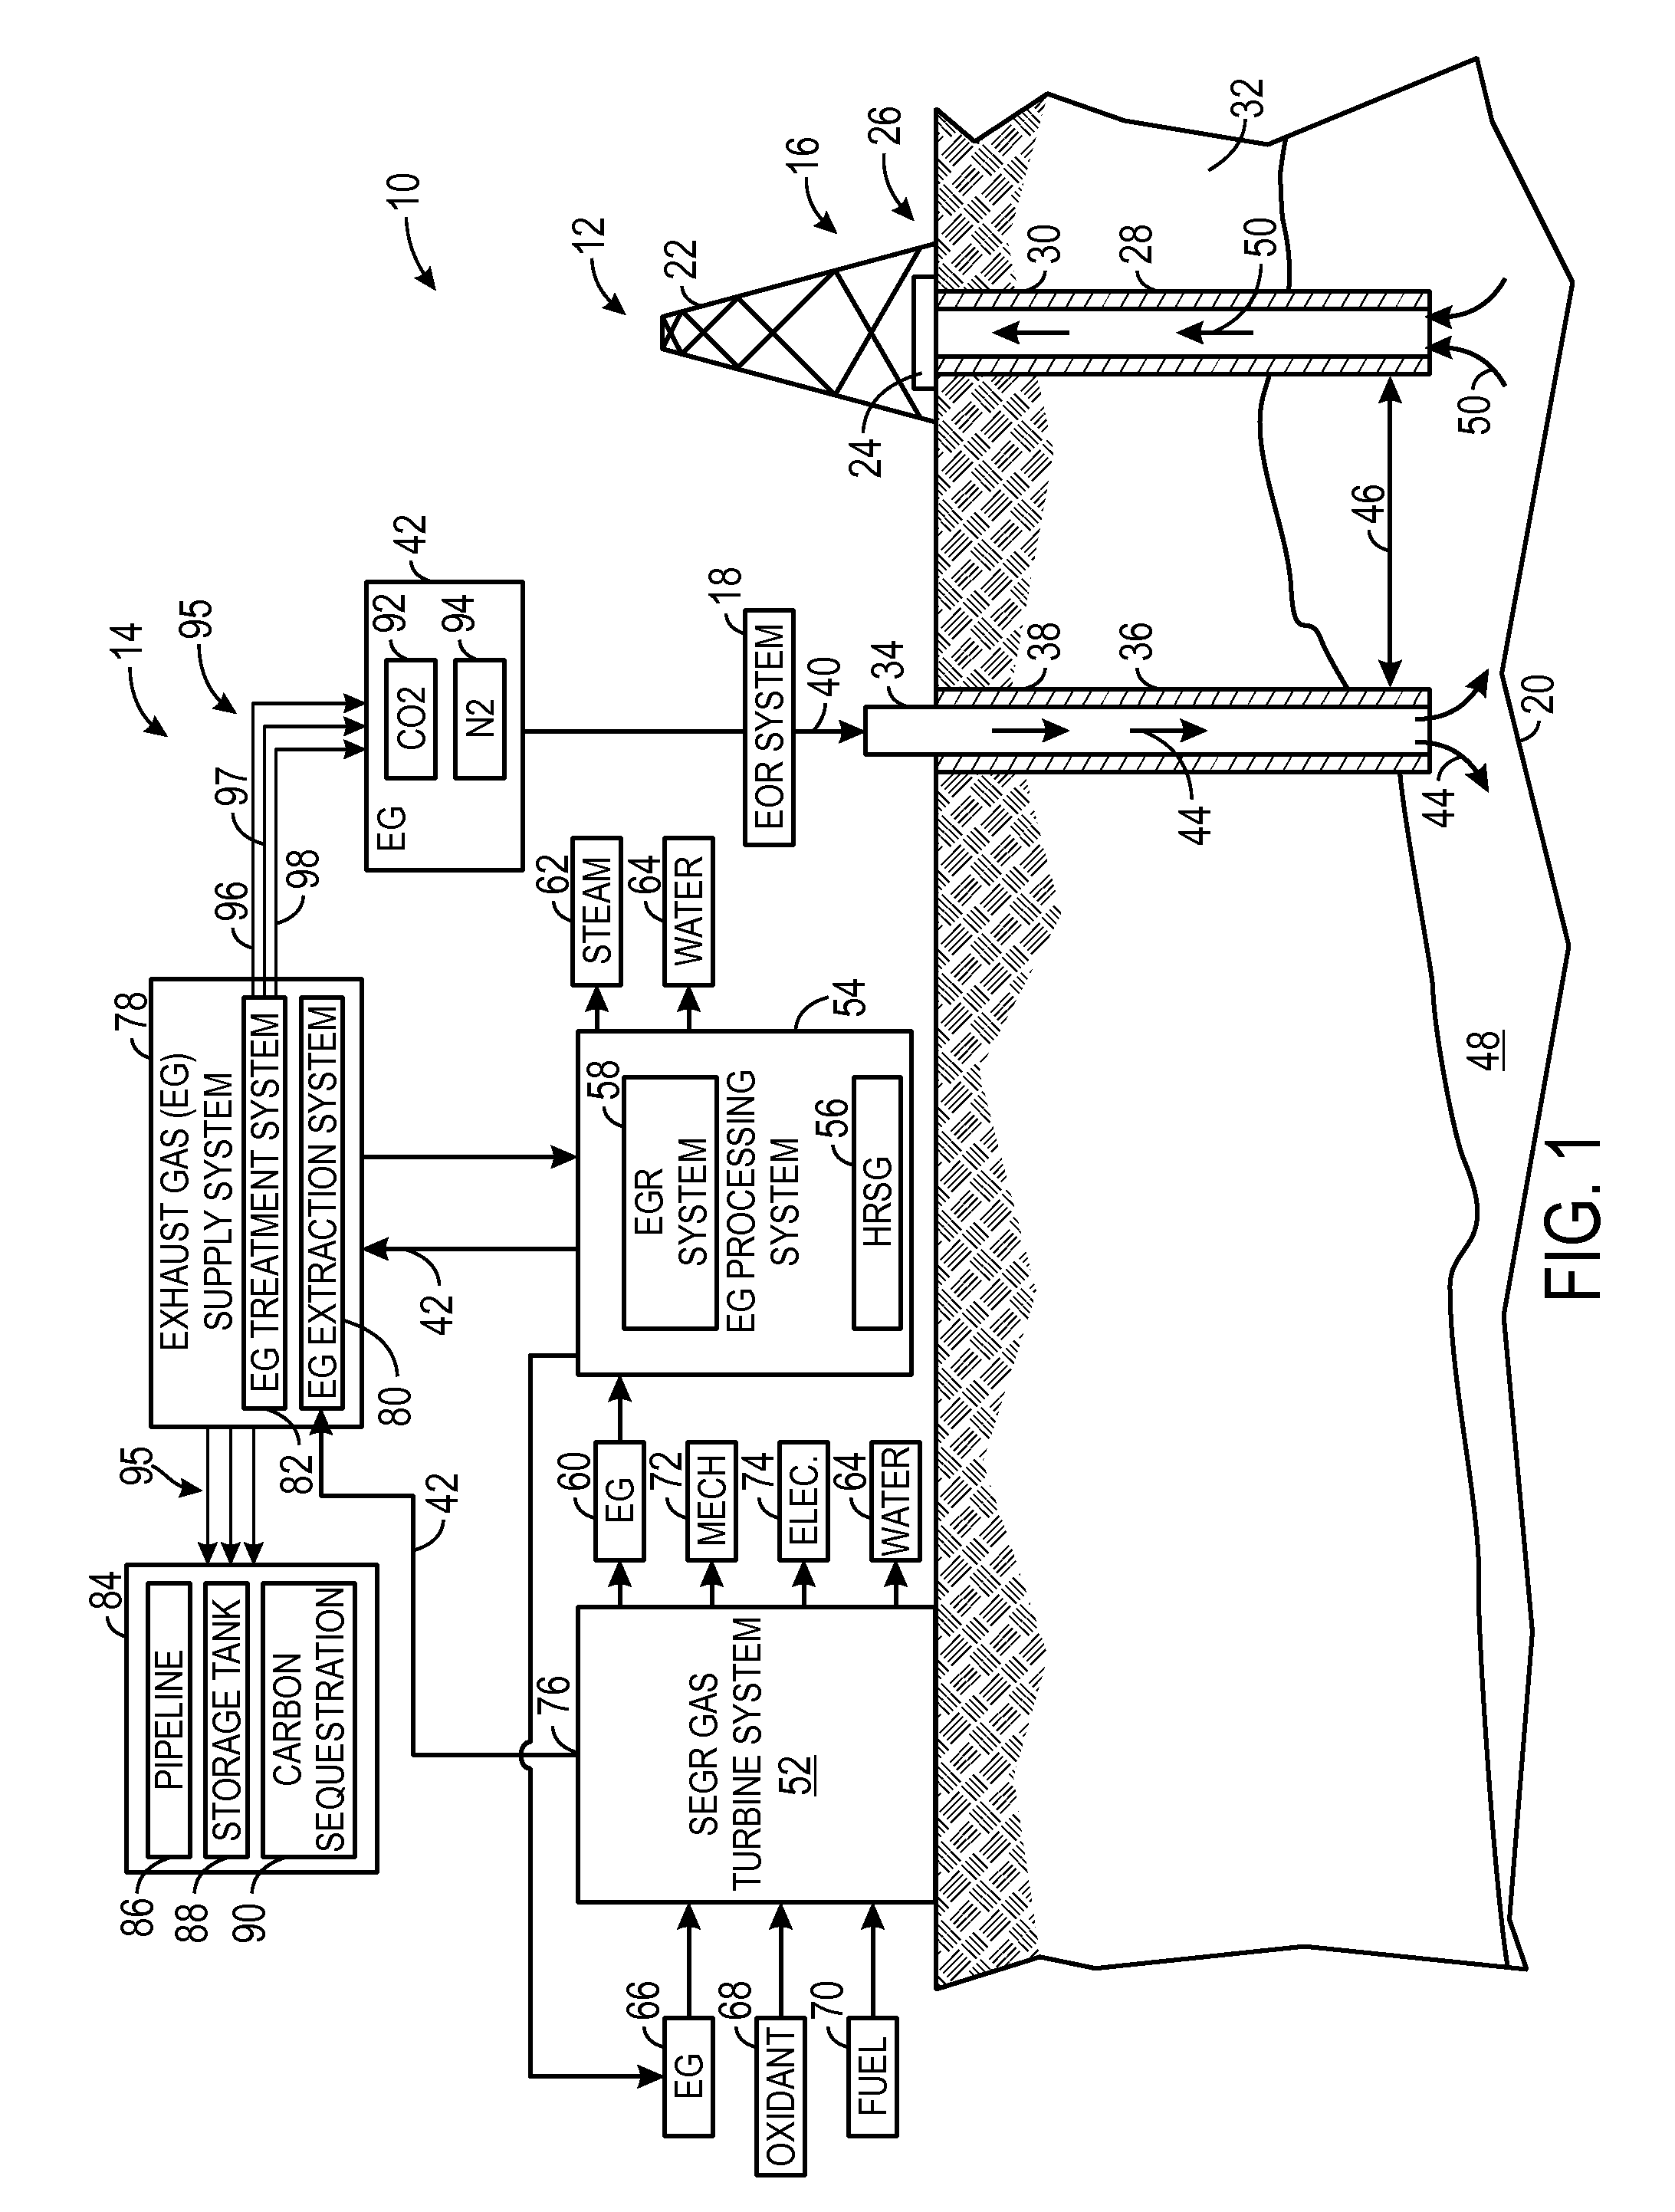 System and method of controlling combustion and emissions in gas turbine engine with exhaust gas recirculation